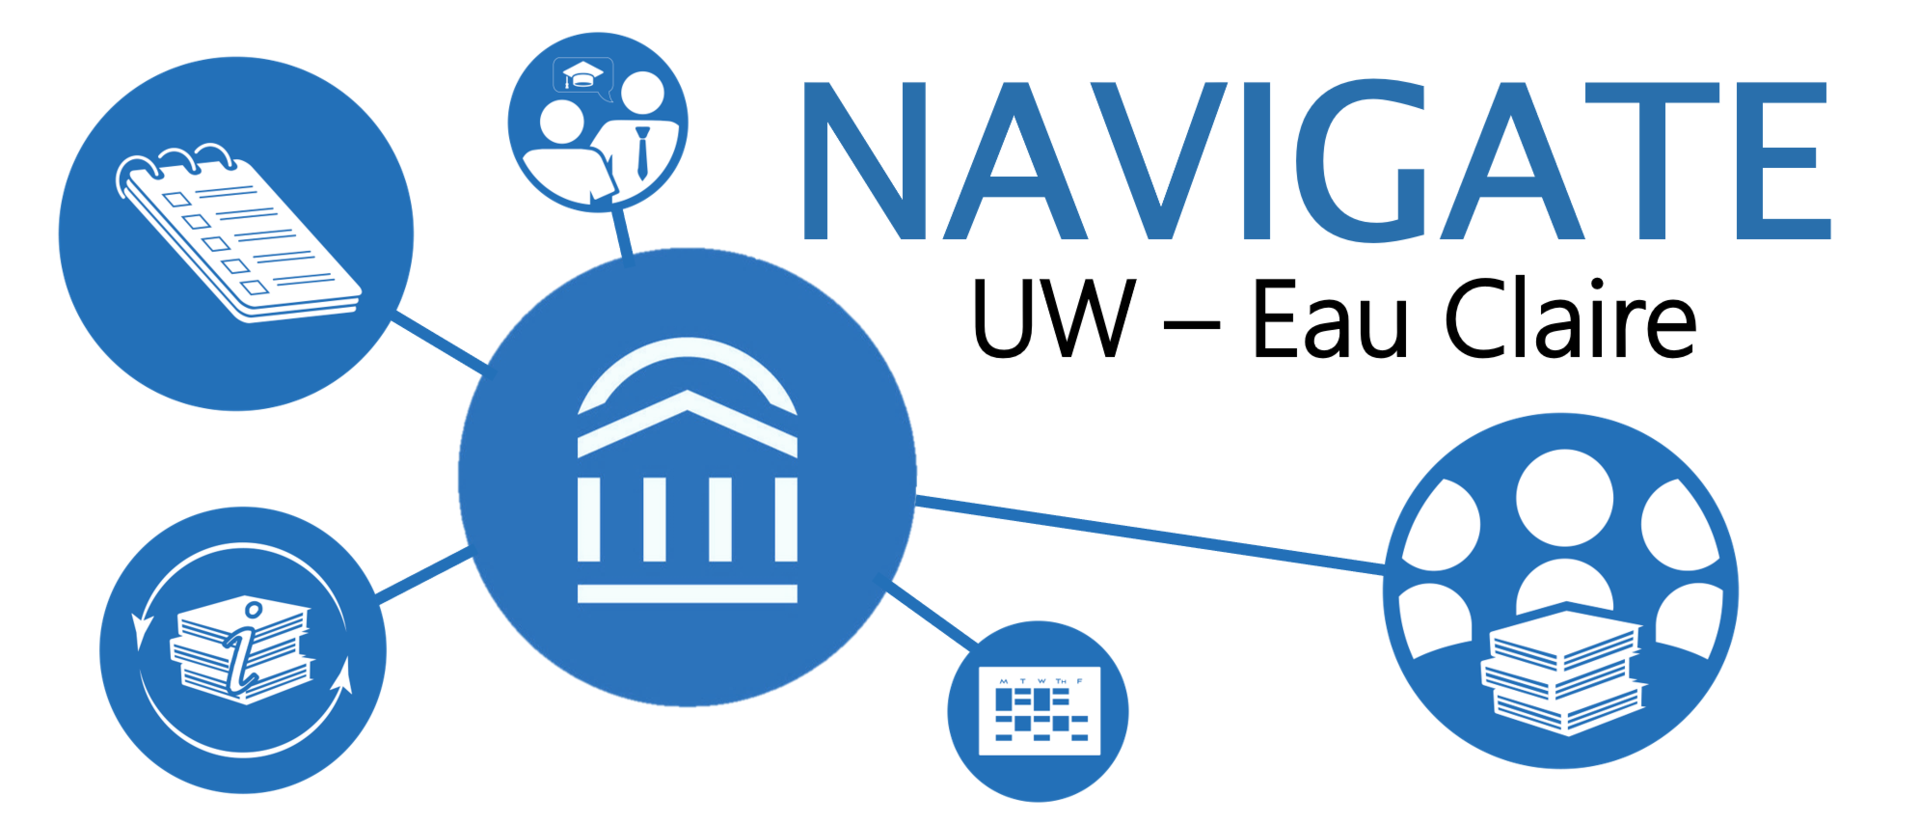 The Navigate Student app and its web of capabilities